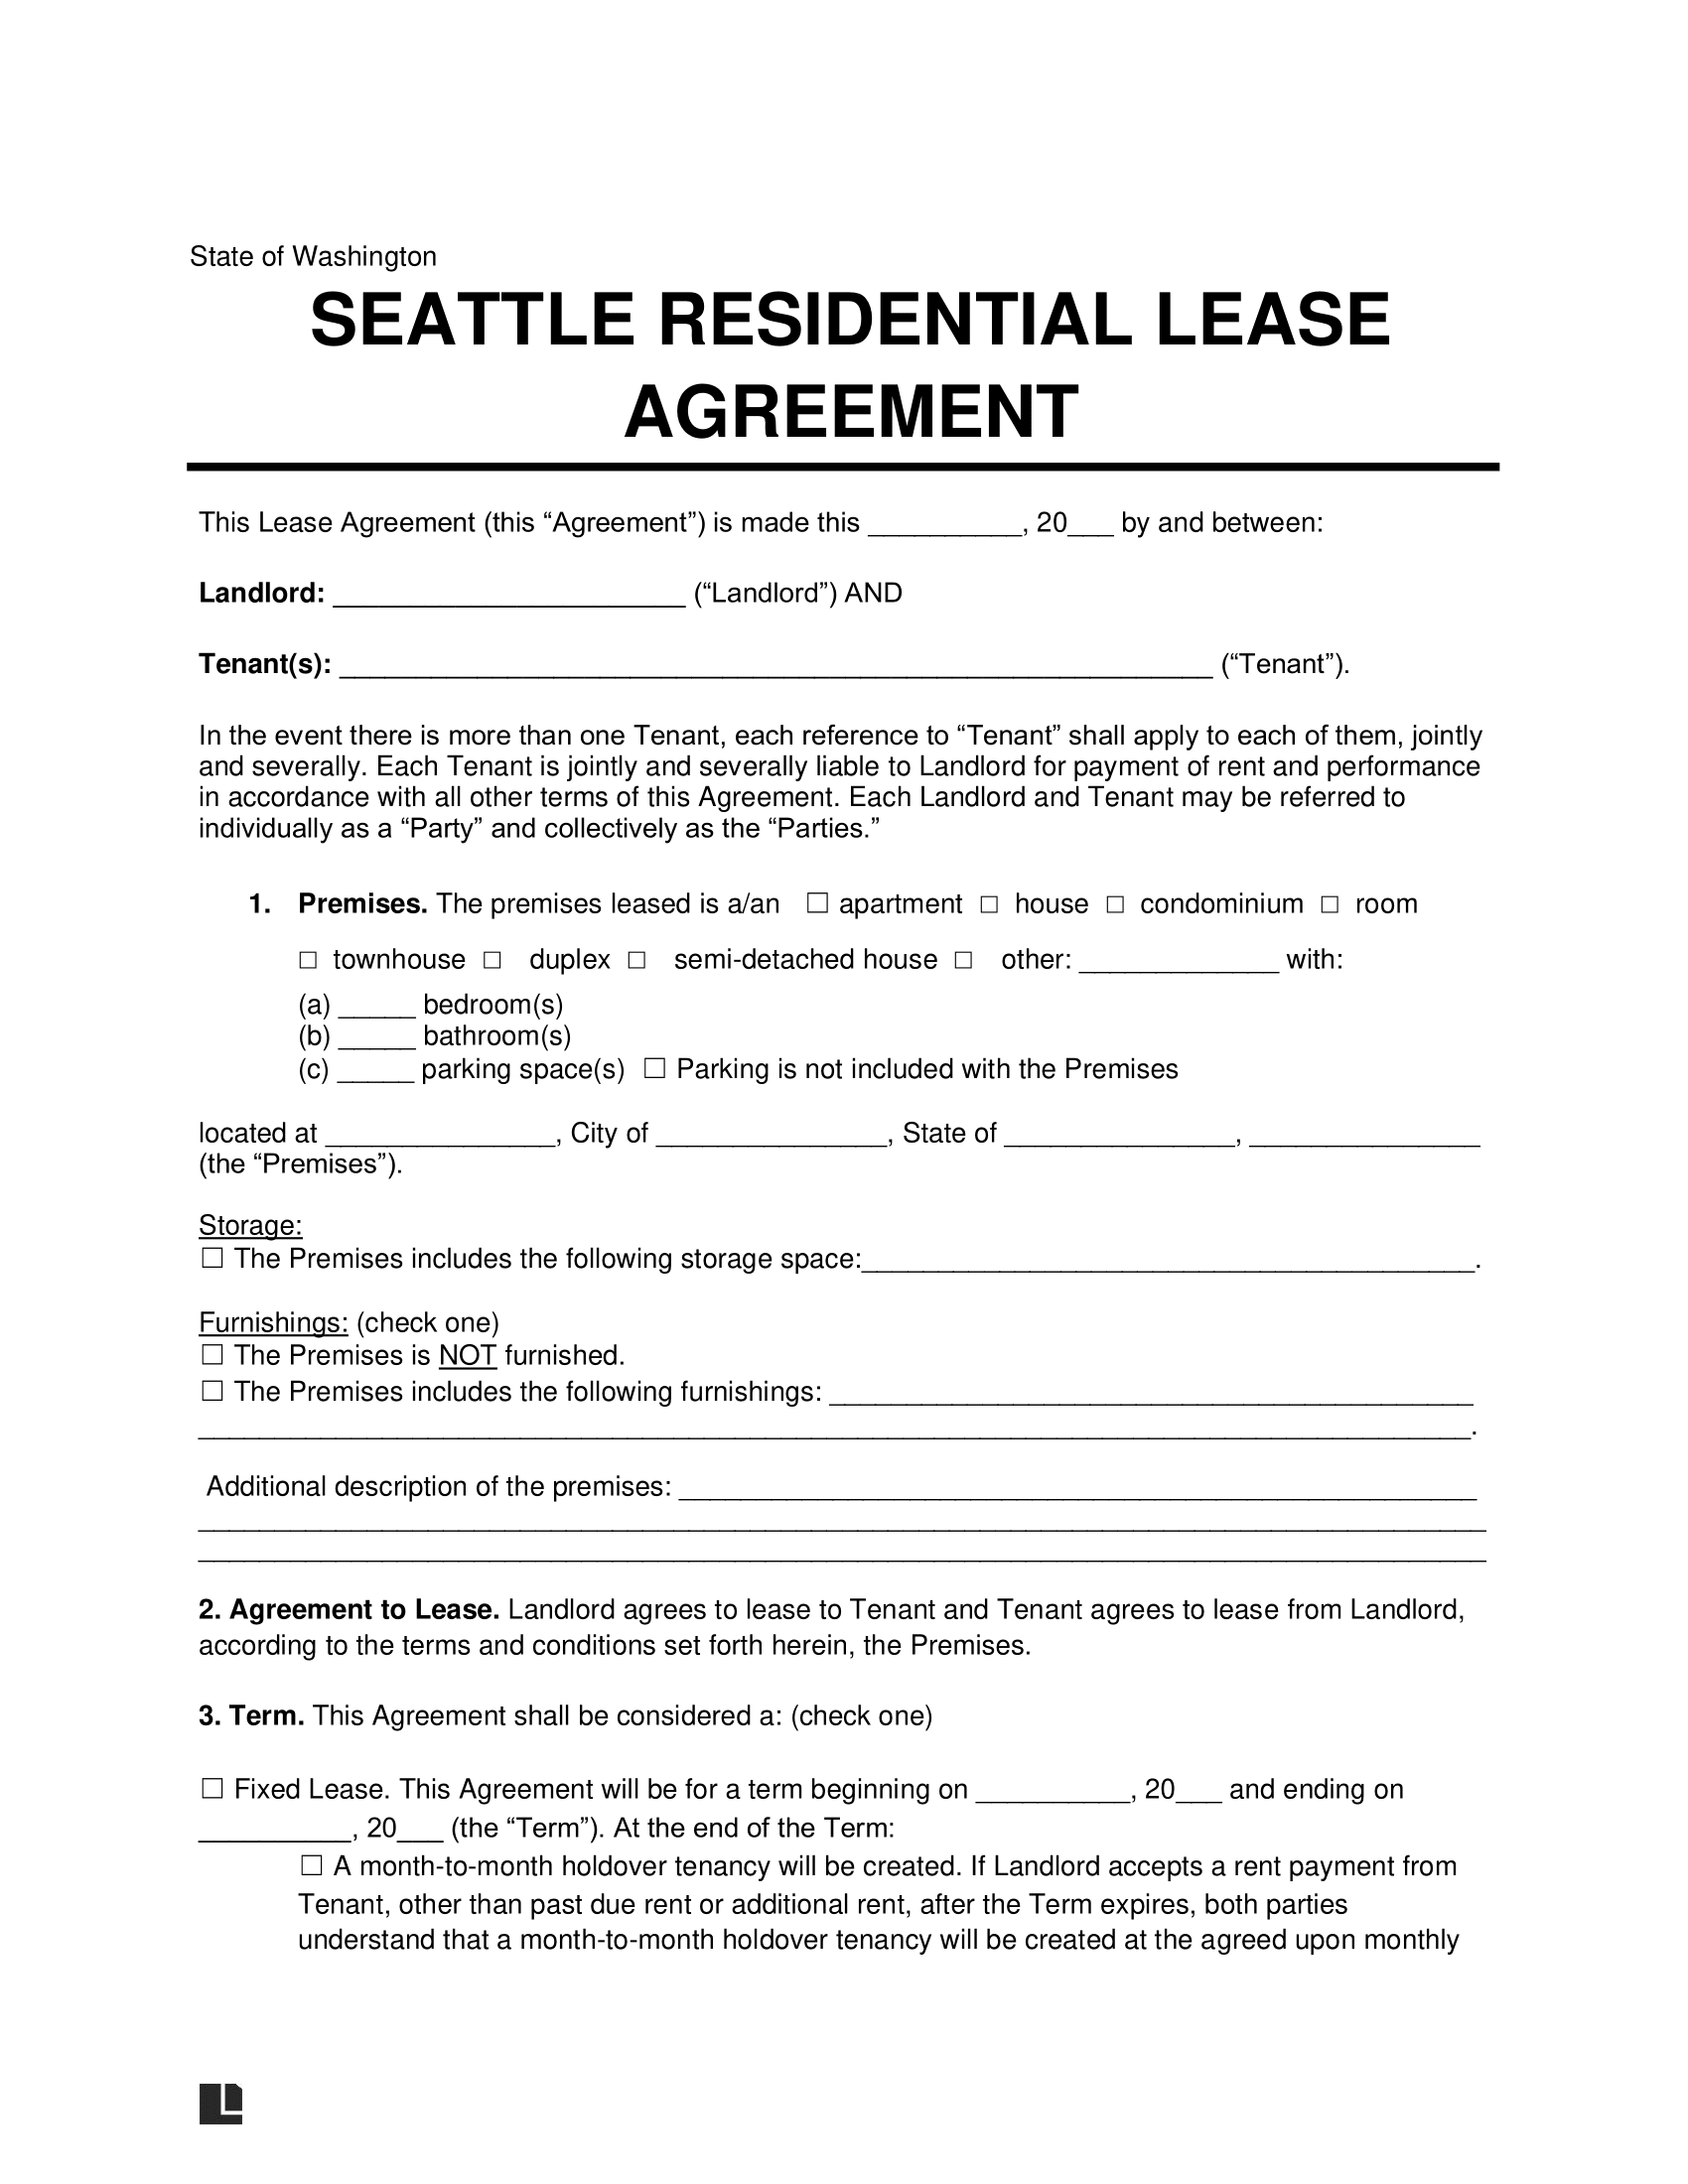 Seattle Residential Lease Agreement Template